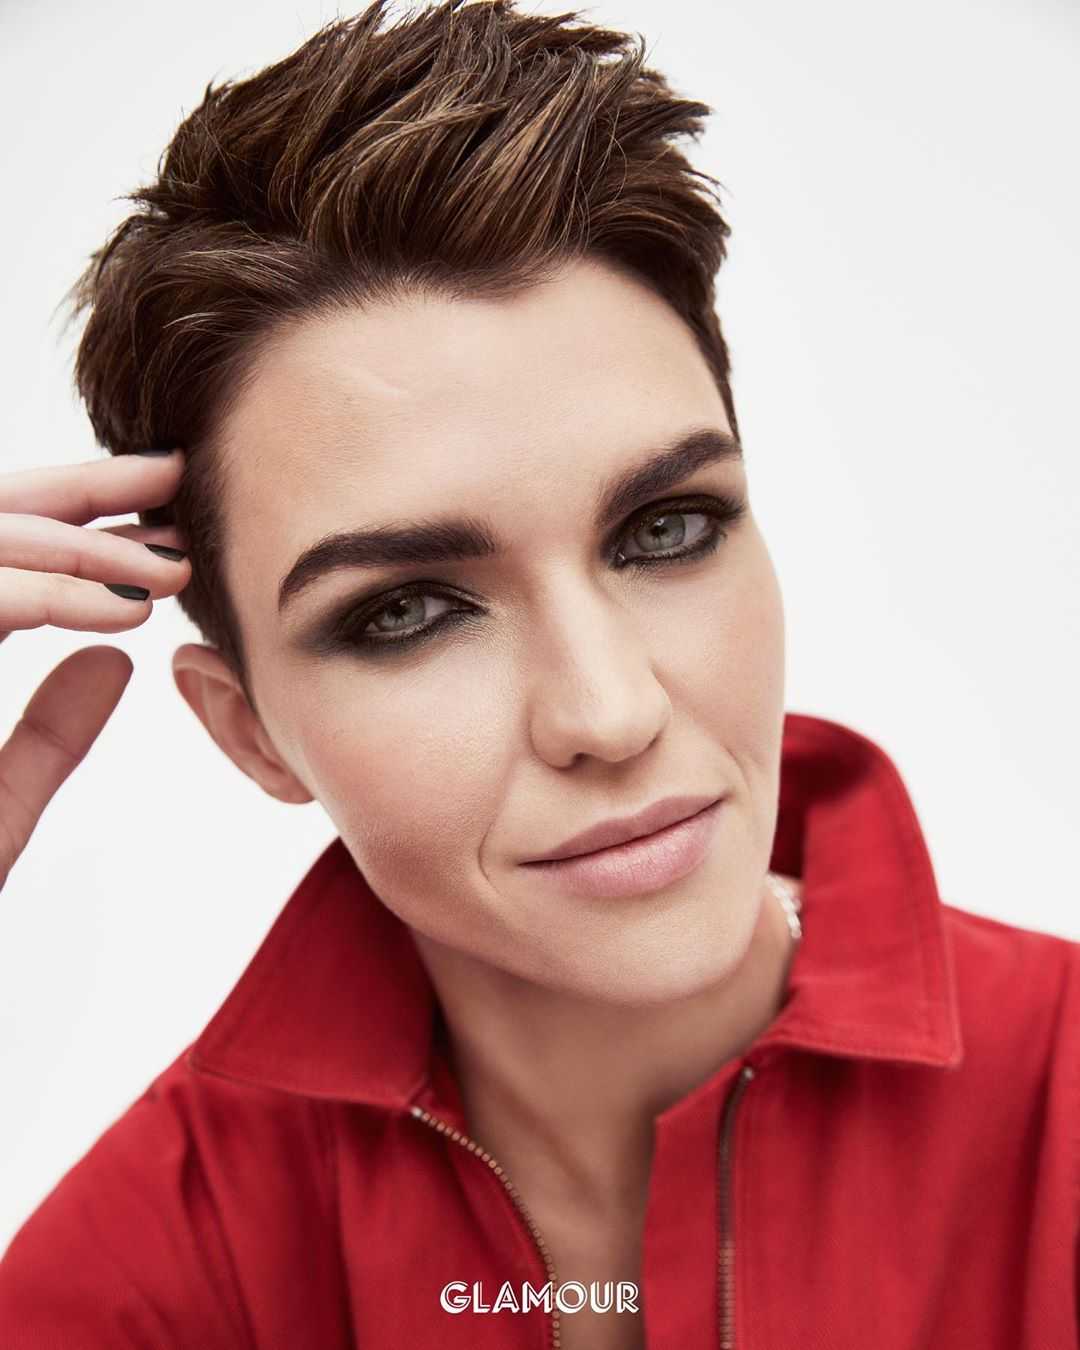 70+ Hot Pictures Of Ruby Rose – Batgirl In Arrowverse And Orange Is The New Black Star. 106